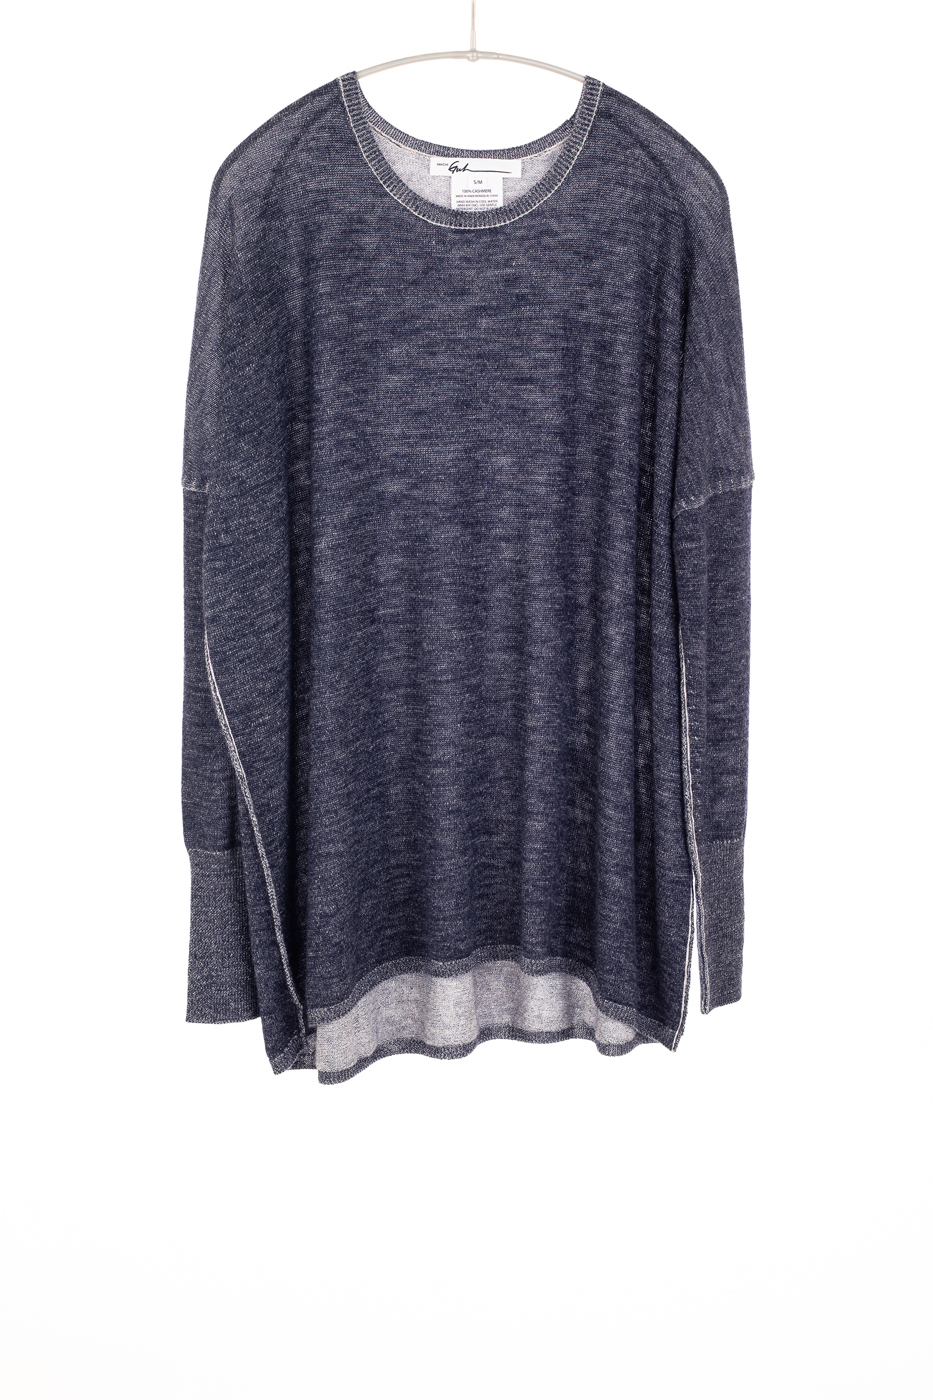 Two Tone Pullover | Worsted Cashmere | Navy/Petal – Paychi Guh